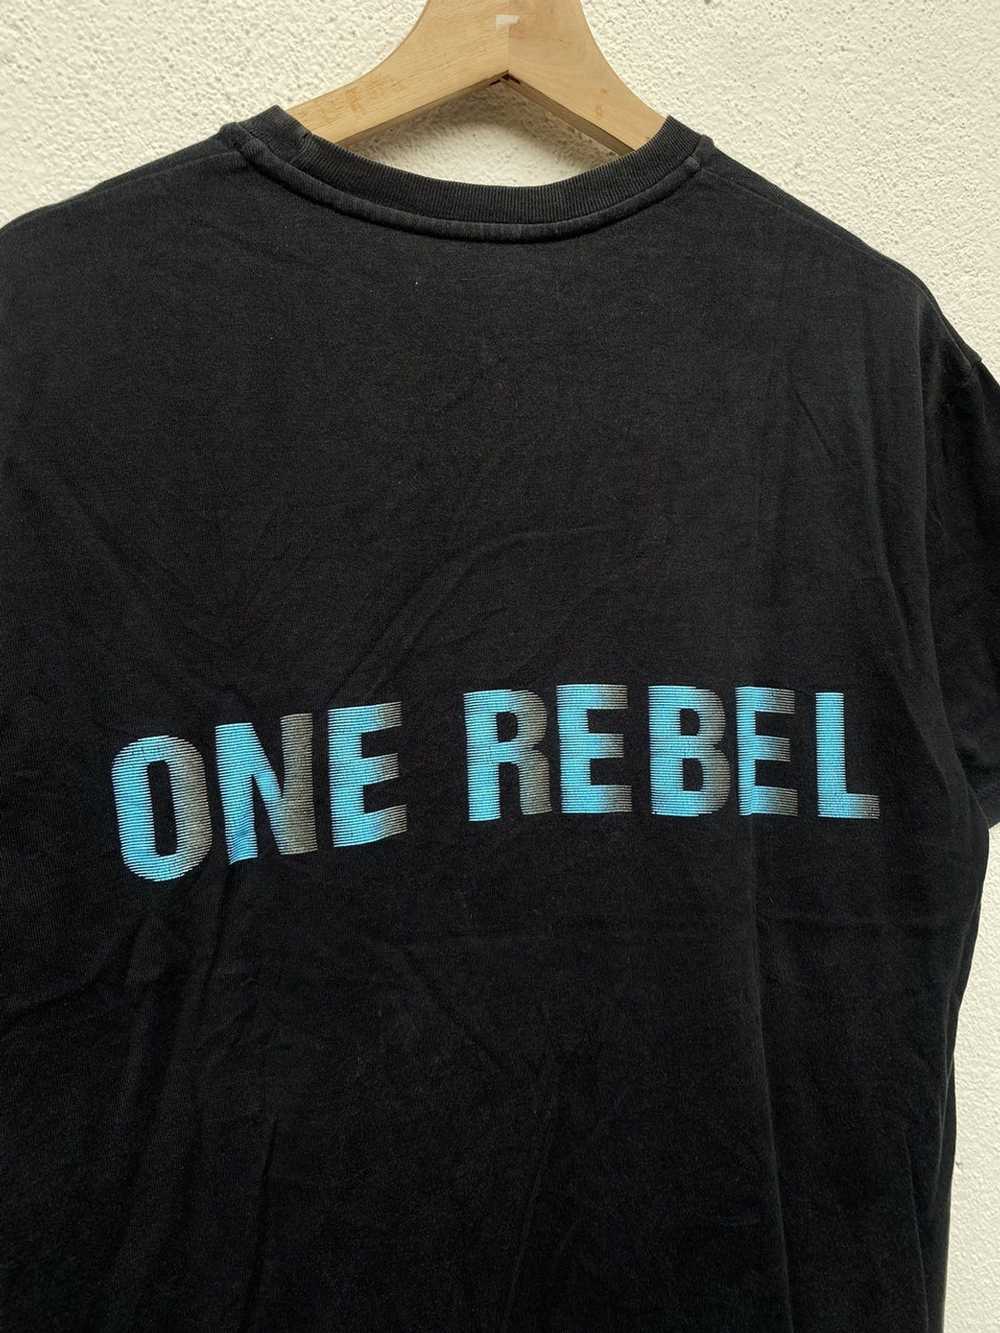 Rare the Famous Japanese Brand UNDERCOVERISM FOR REBELS Jun 